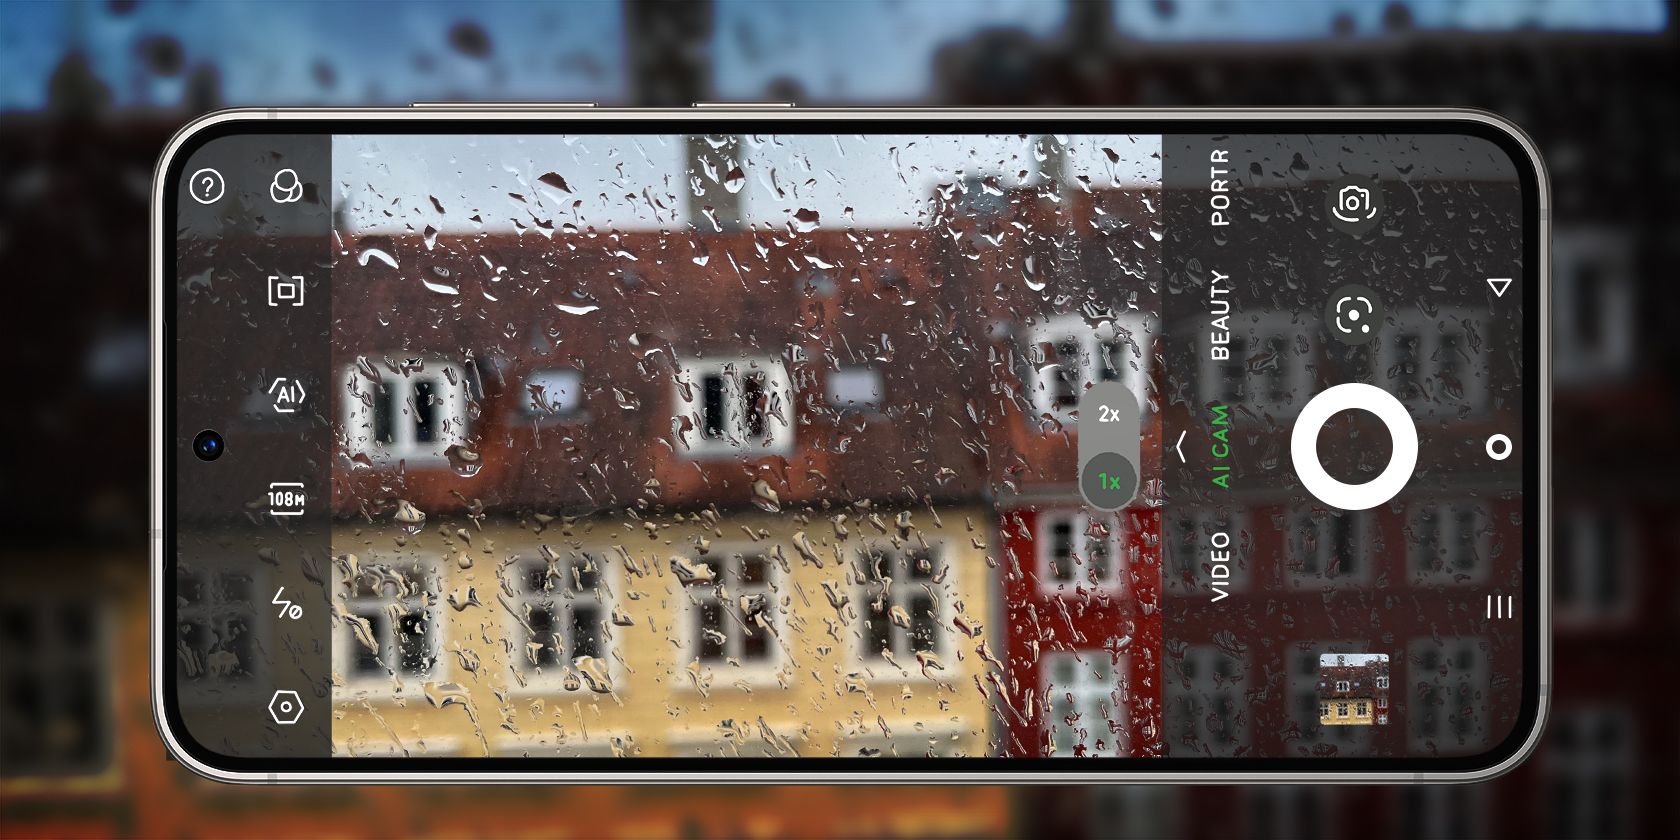 A phone with droplets of water capturing a rainy scenery